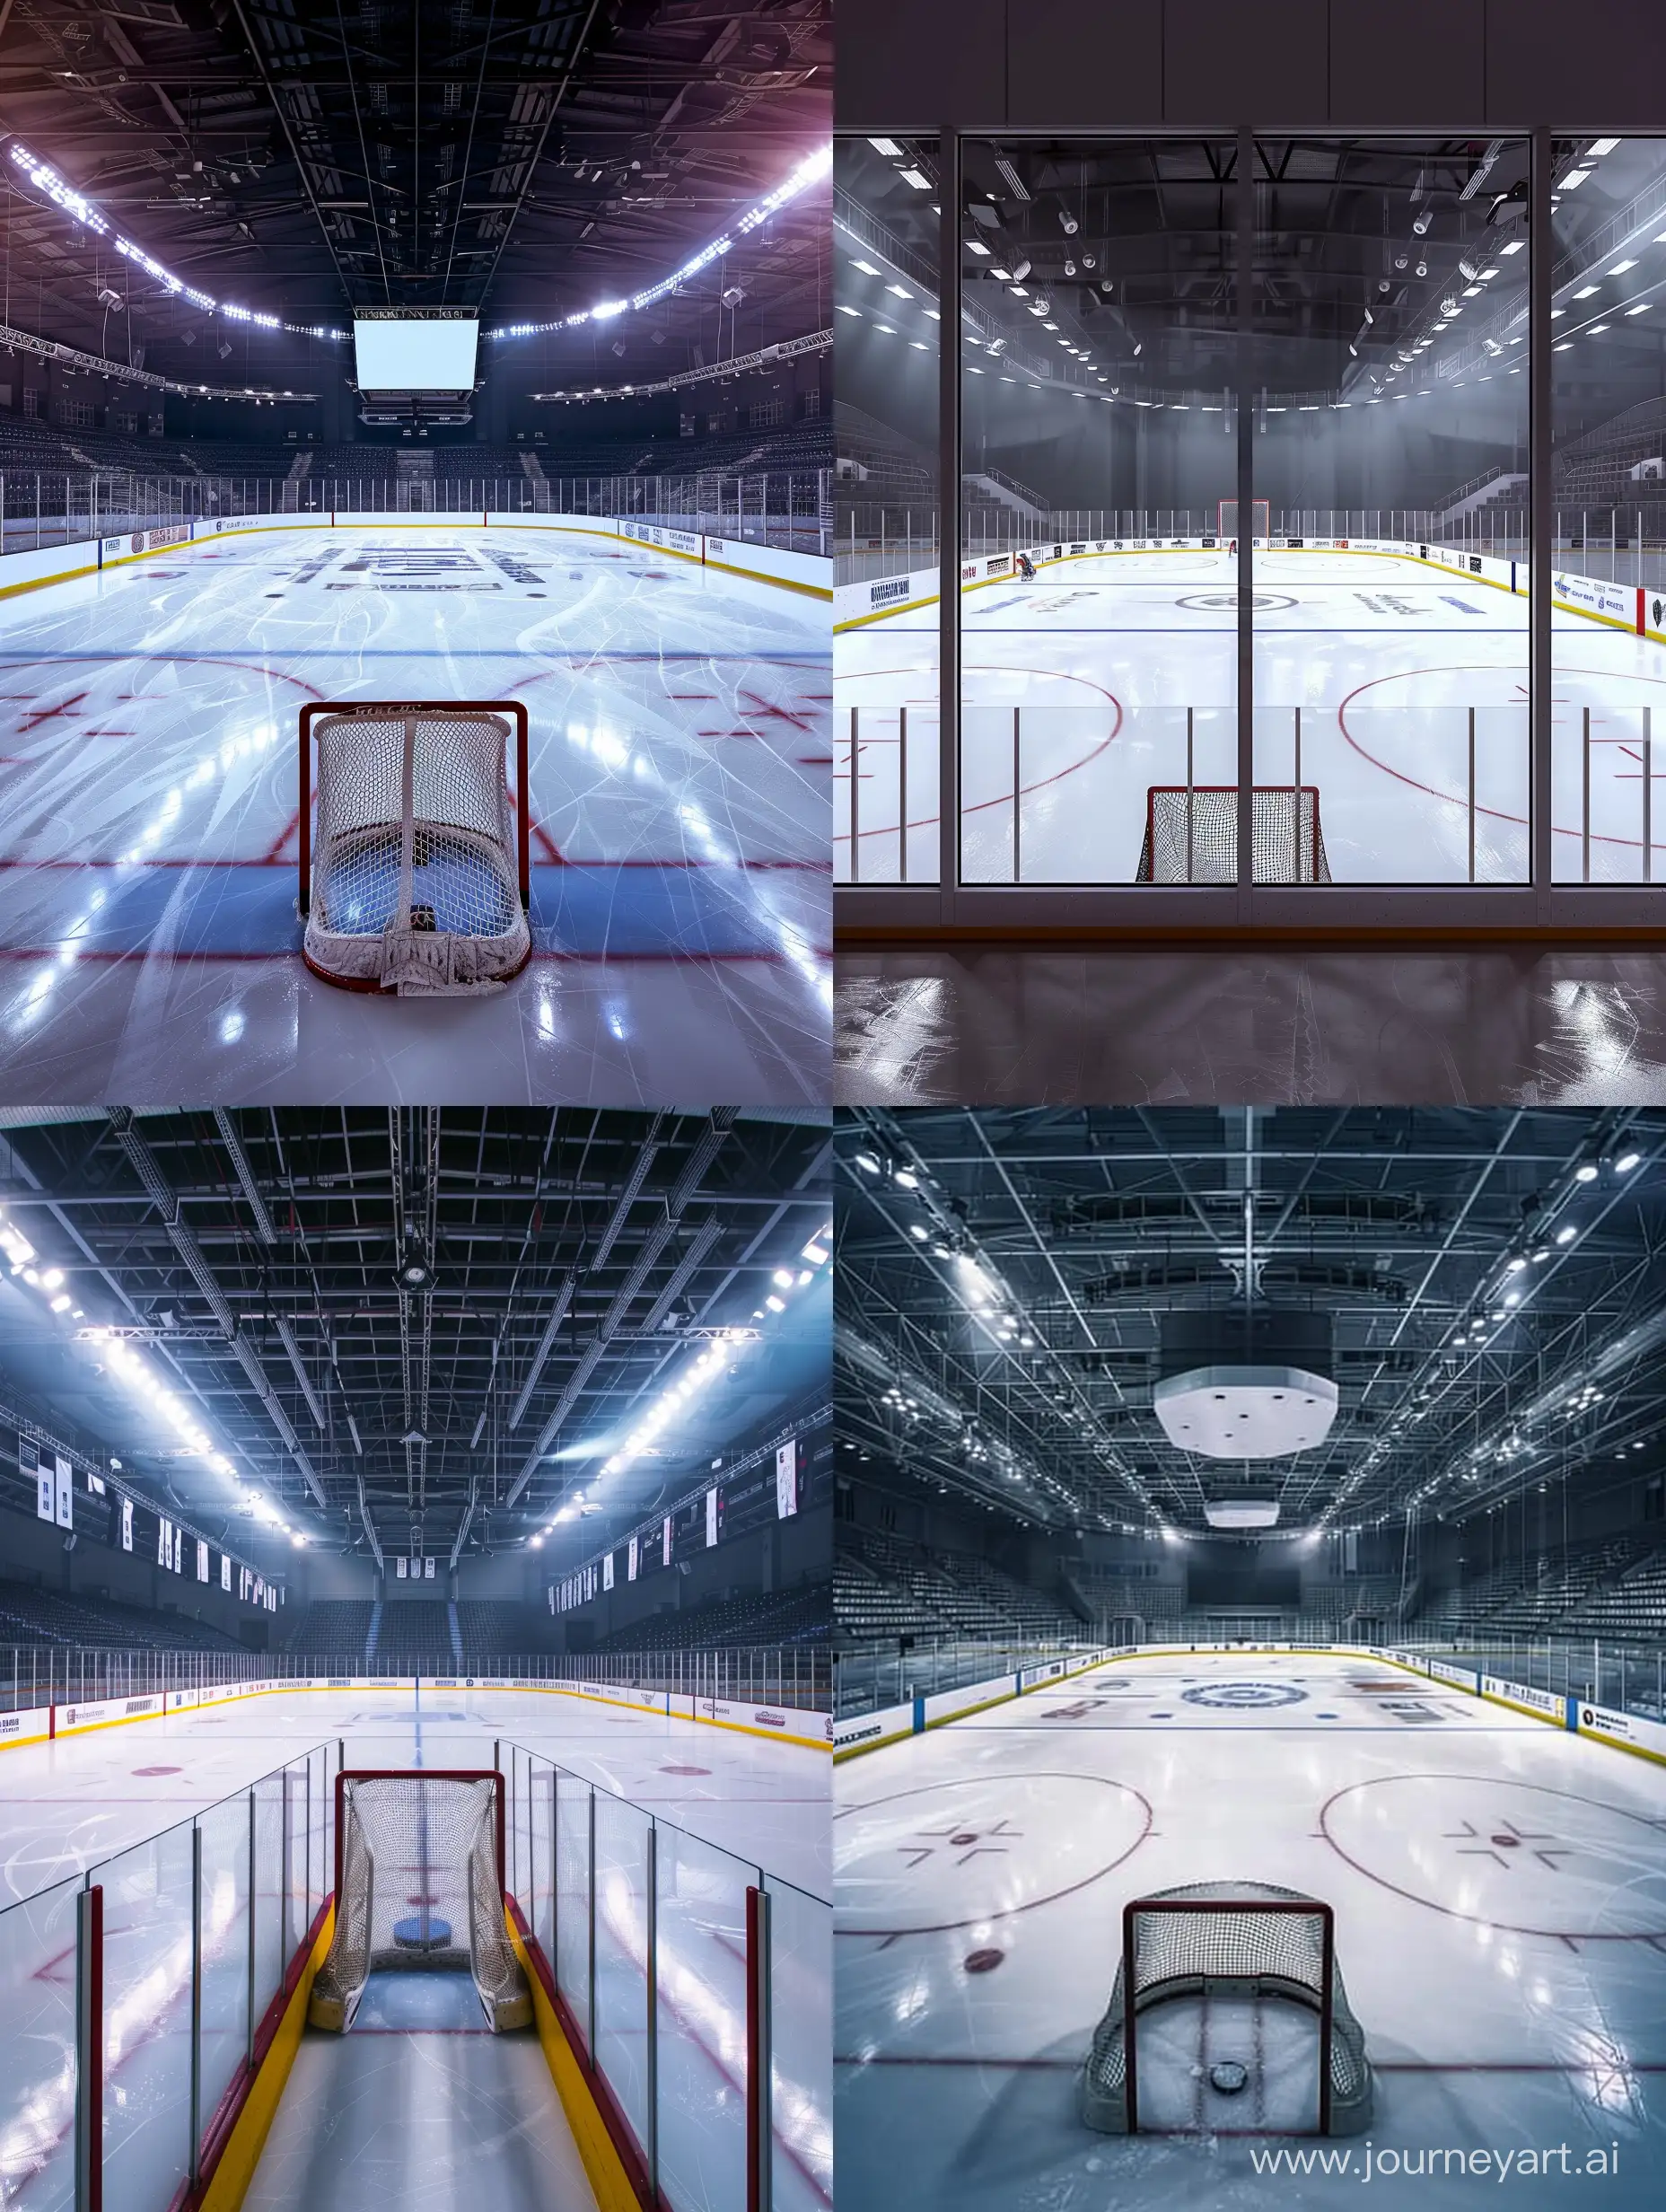 Modern-Ice-Hockey-Stadium-View-Dynamic-Perspective-on-the-Ice